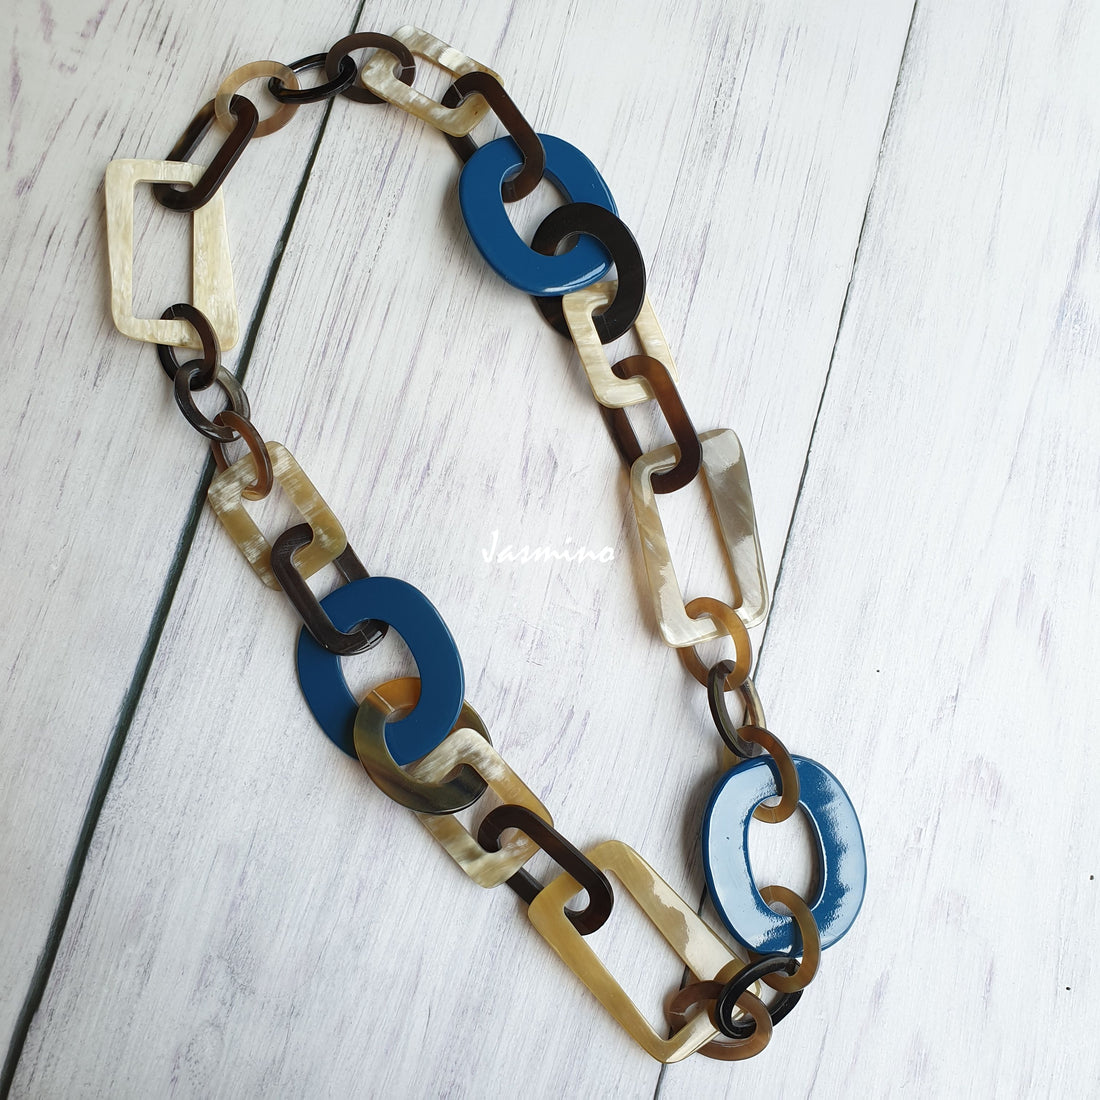 Jasmino unique handmade Vintage wide blue chain necklace is shaped by a circle and rectangle in natural buffalo horn for women